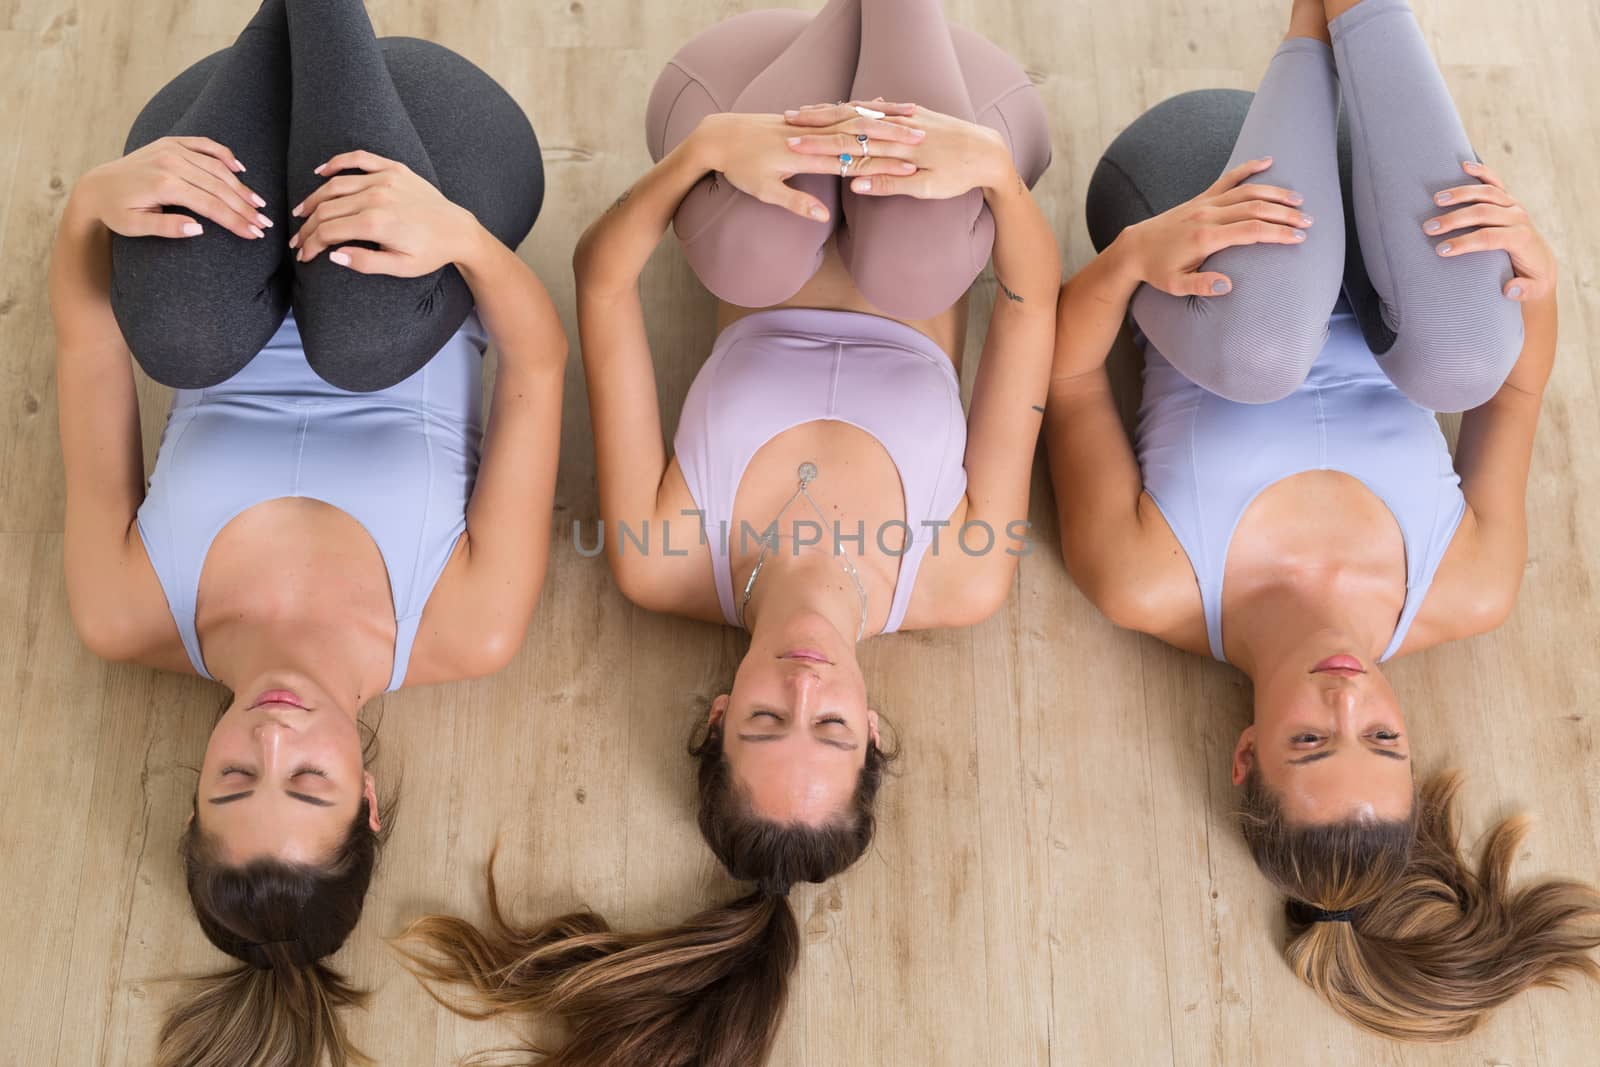 Group of three young sporty attractive women in yoga studio, lying on the floor, stretching and relaxing after the workout. Healthy active lifestyle, working out indoors in gym by kasto